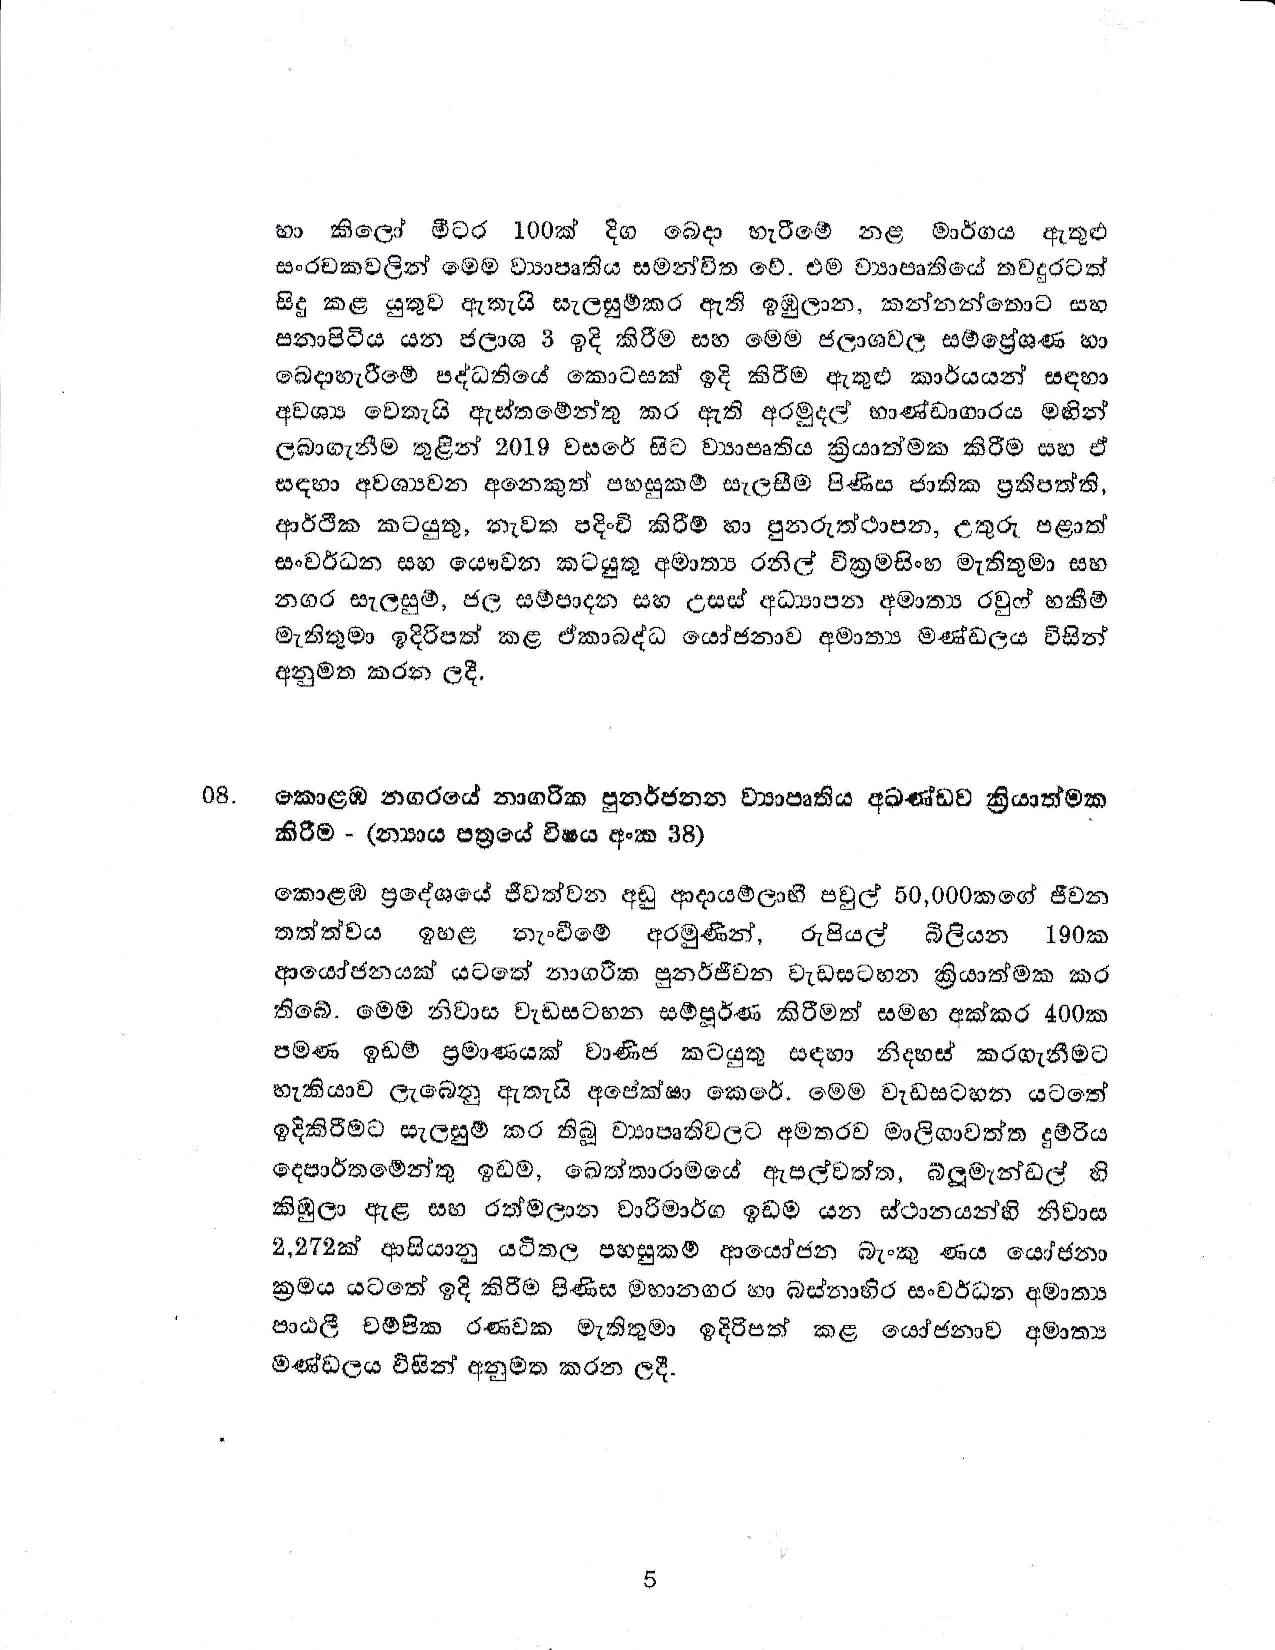 Cabinet Decision on 21.05.2019 page 005